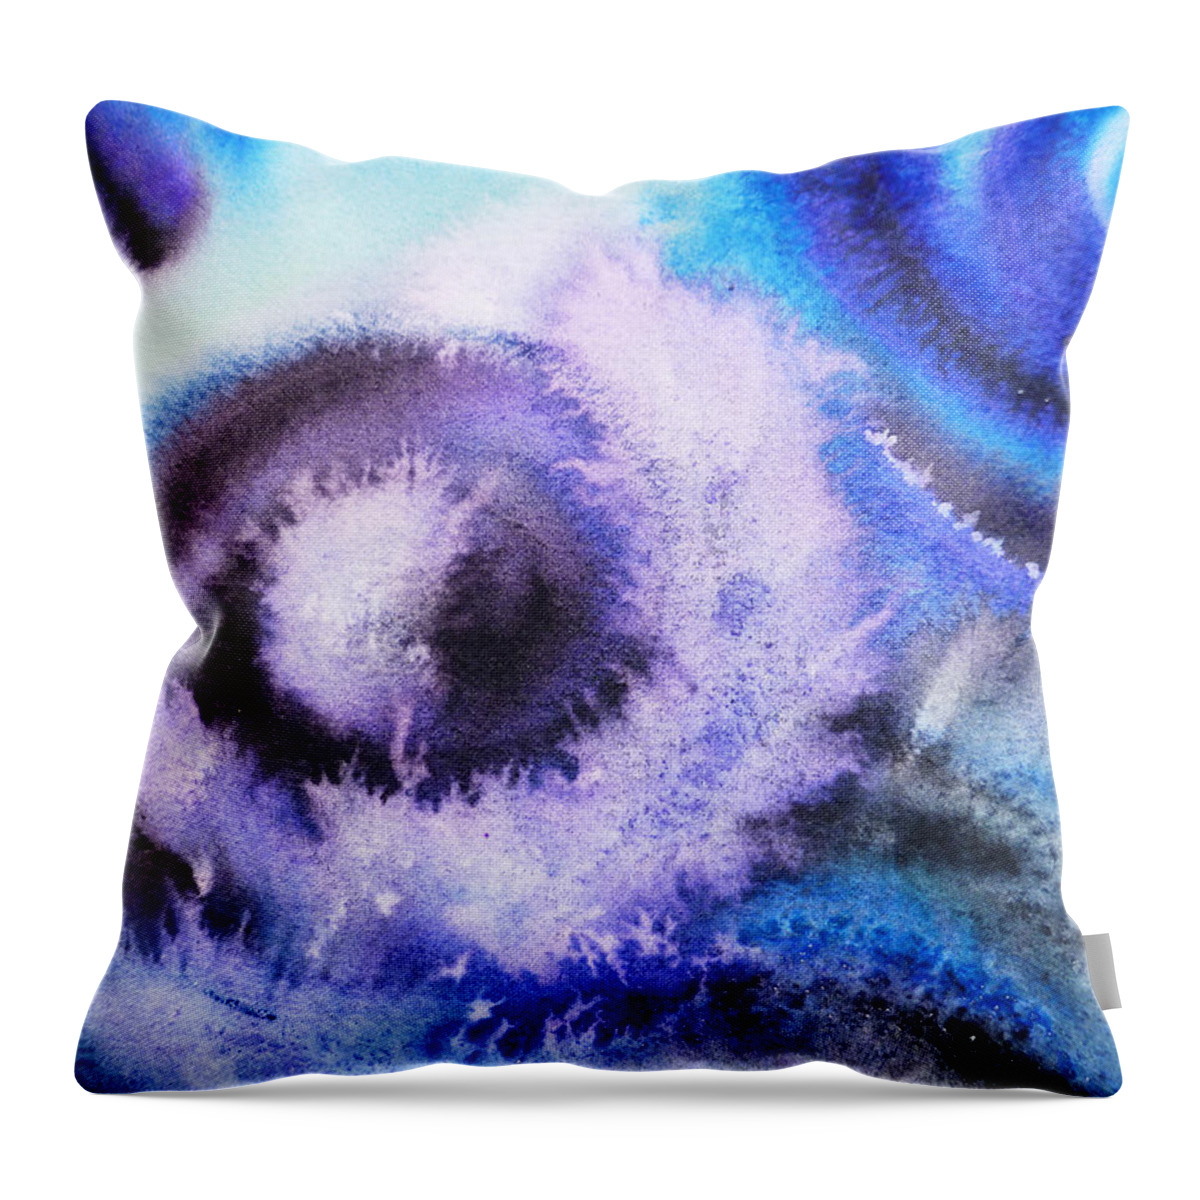 Abstract Throw Pillow featuring the painting Dancing Water IV by Irina Sztukowski